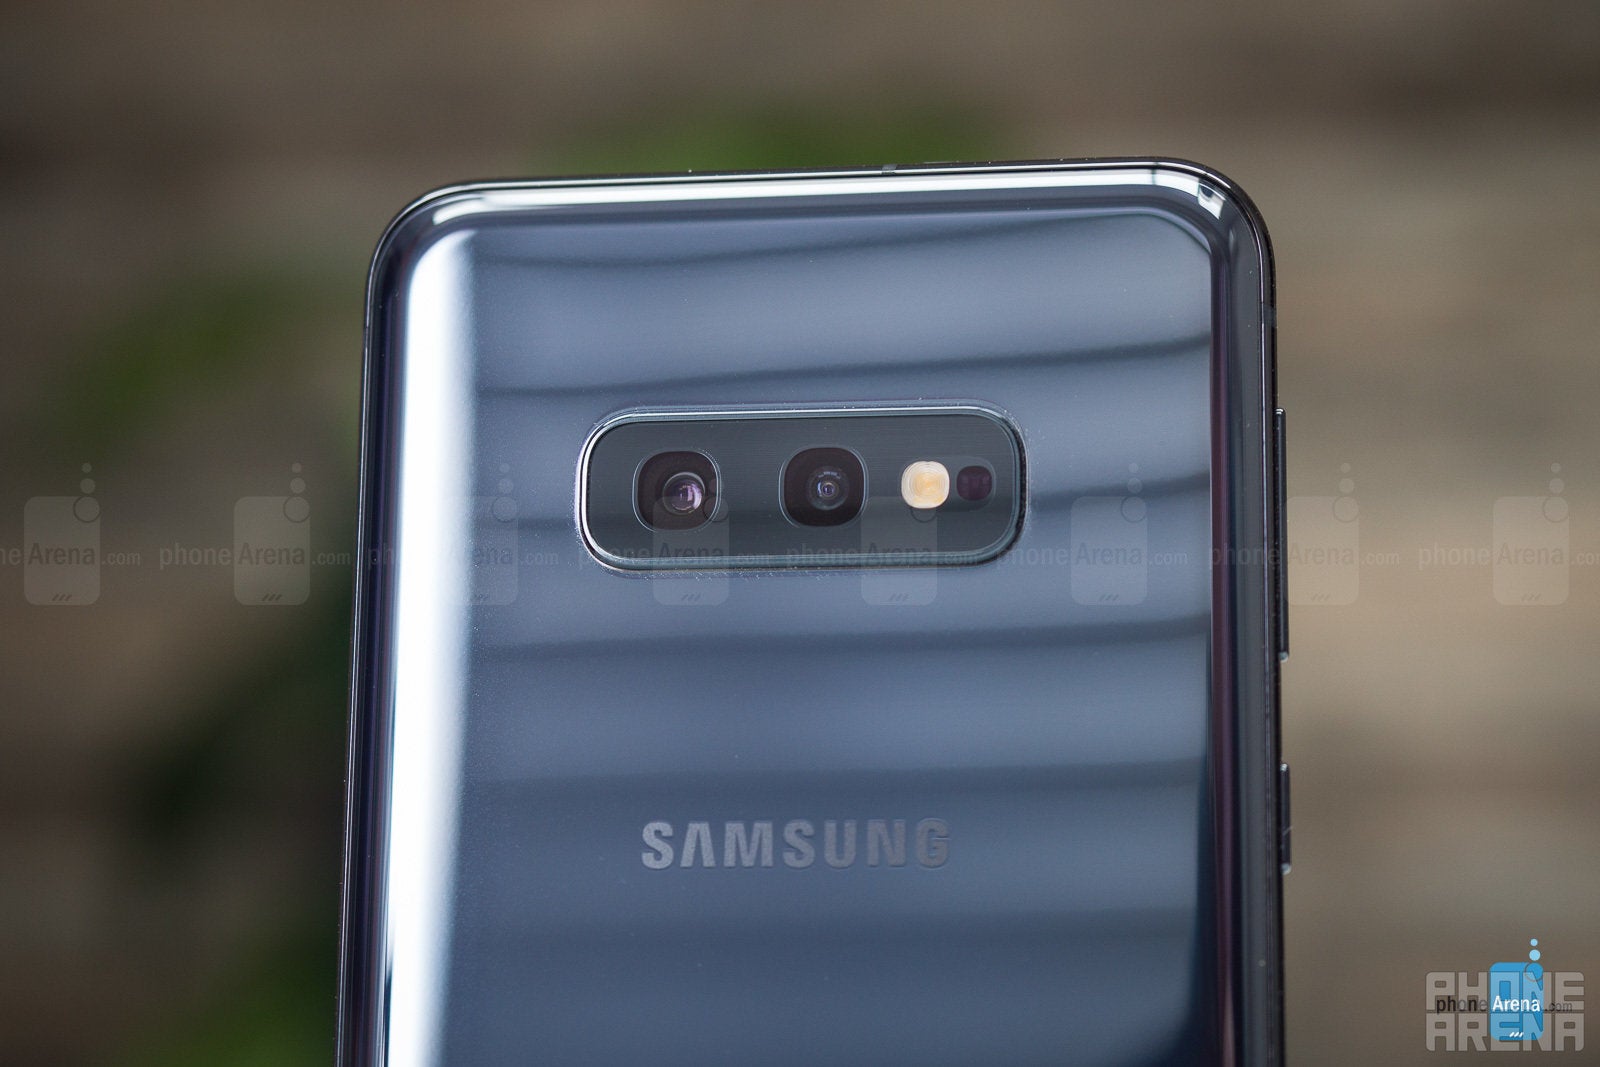 Samsung Galaxy S10e vs Galaxy S10 vs Galaxy S10+: which one is the best for you? Bonus: Wait for Galaxy S10 5G?